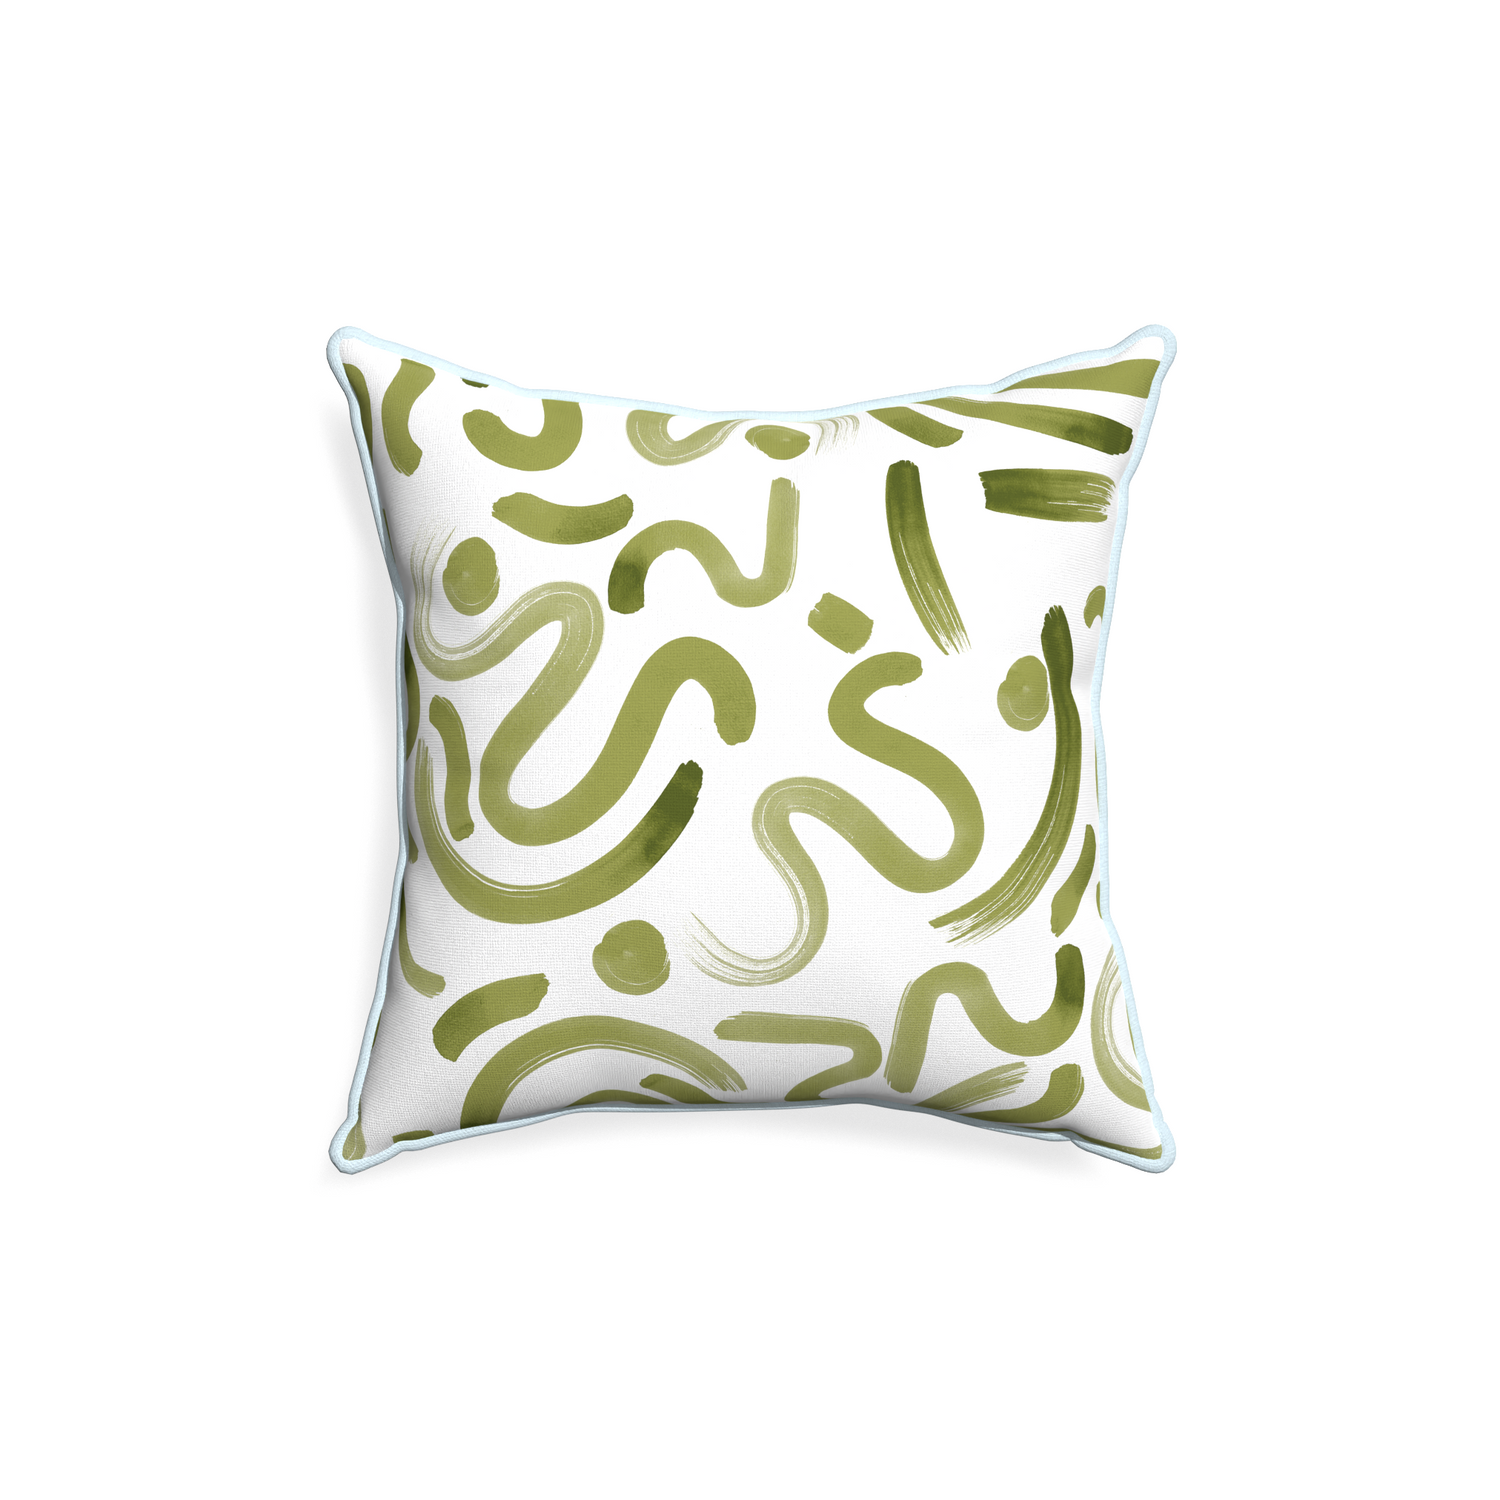 18-square hockney moss custom pillow with powder piping on white background